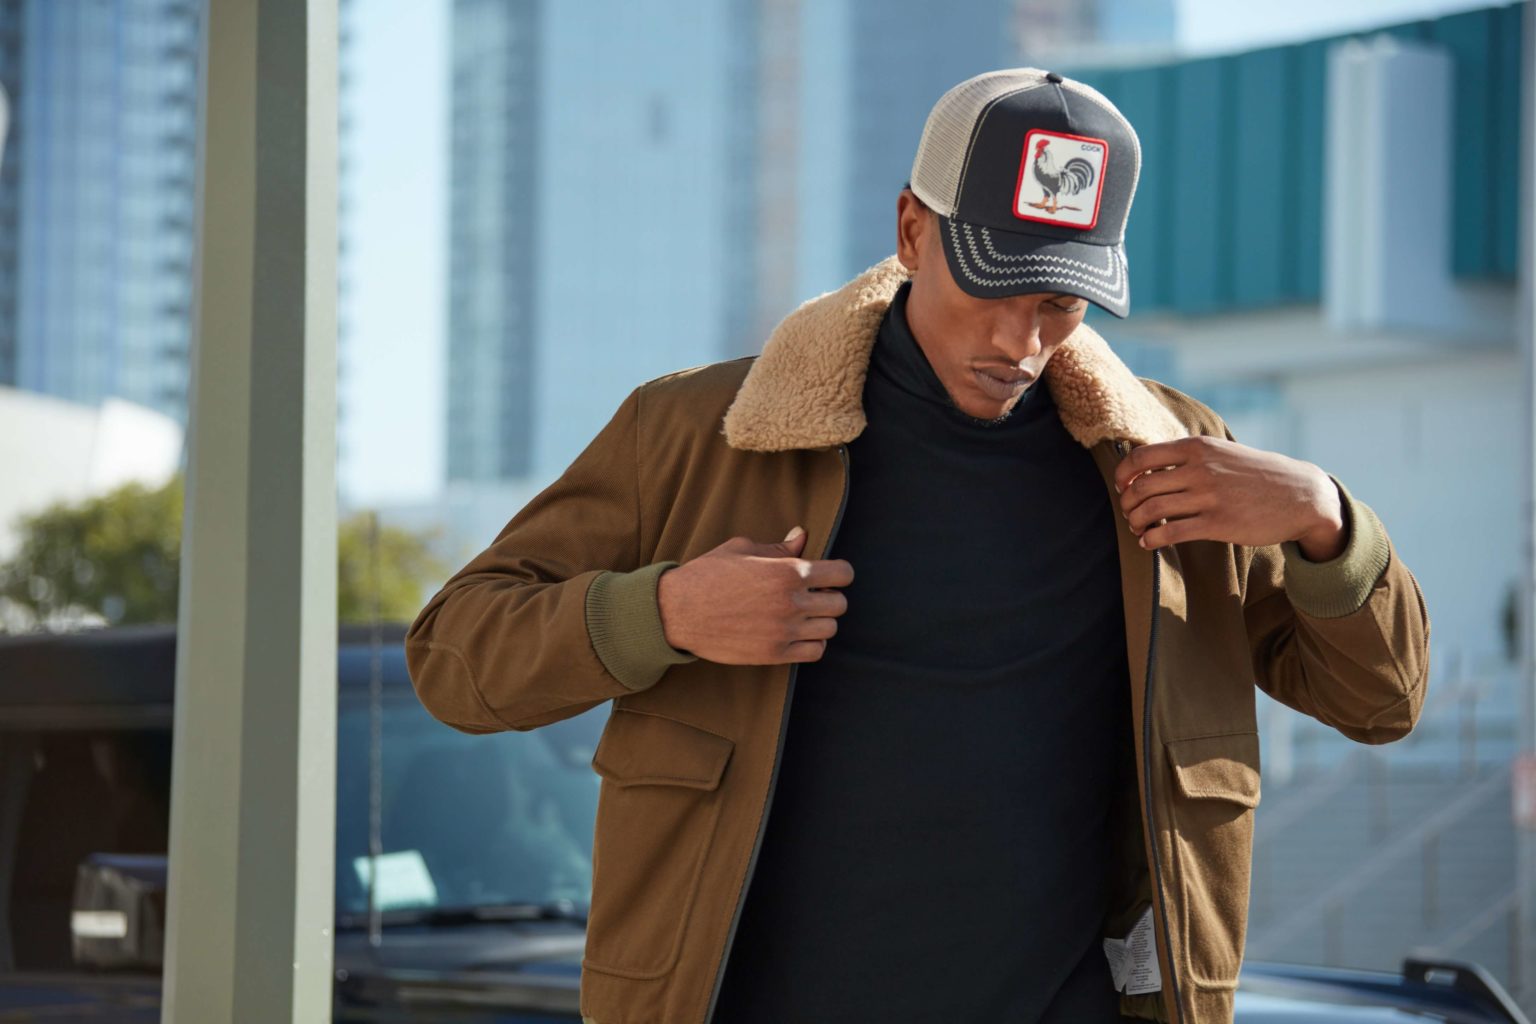 A male model walking on road wearing a tan color sweater and a cap